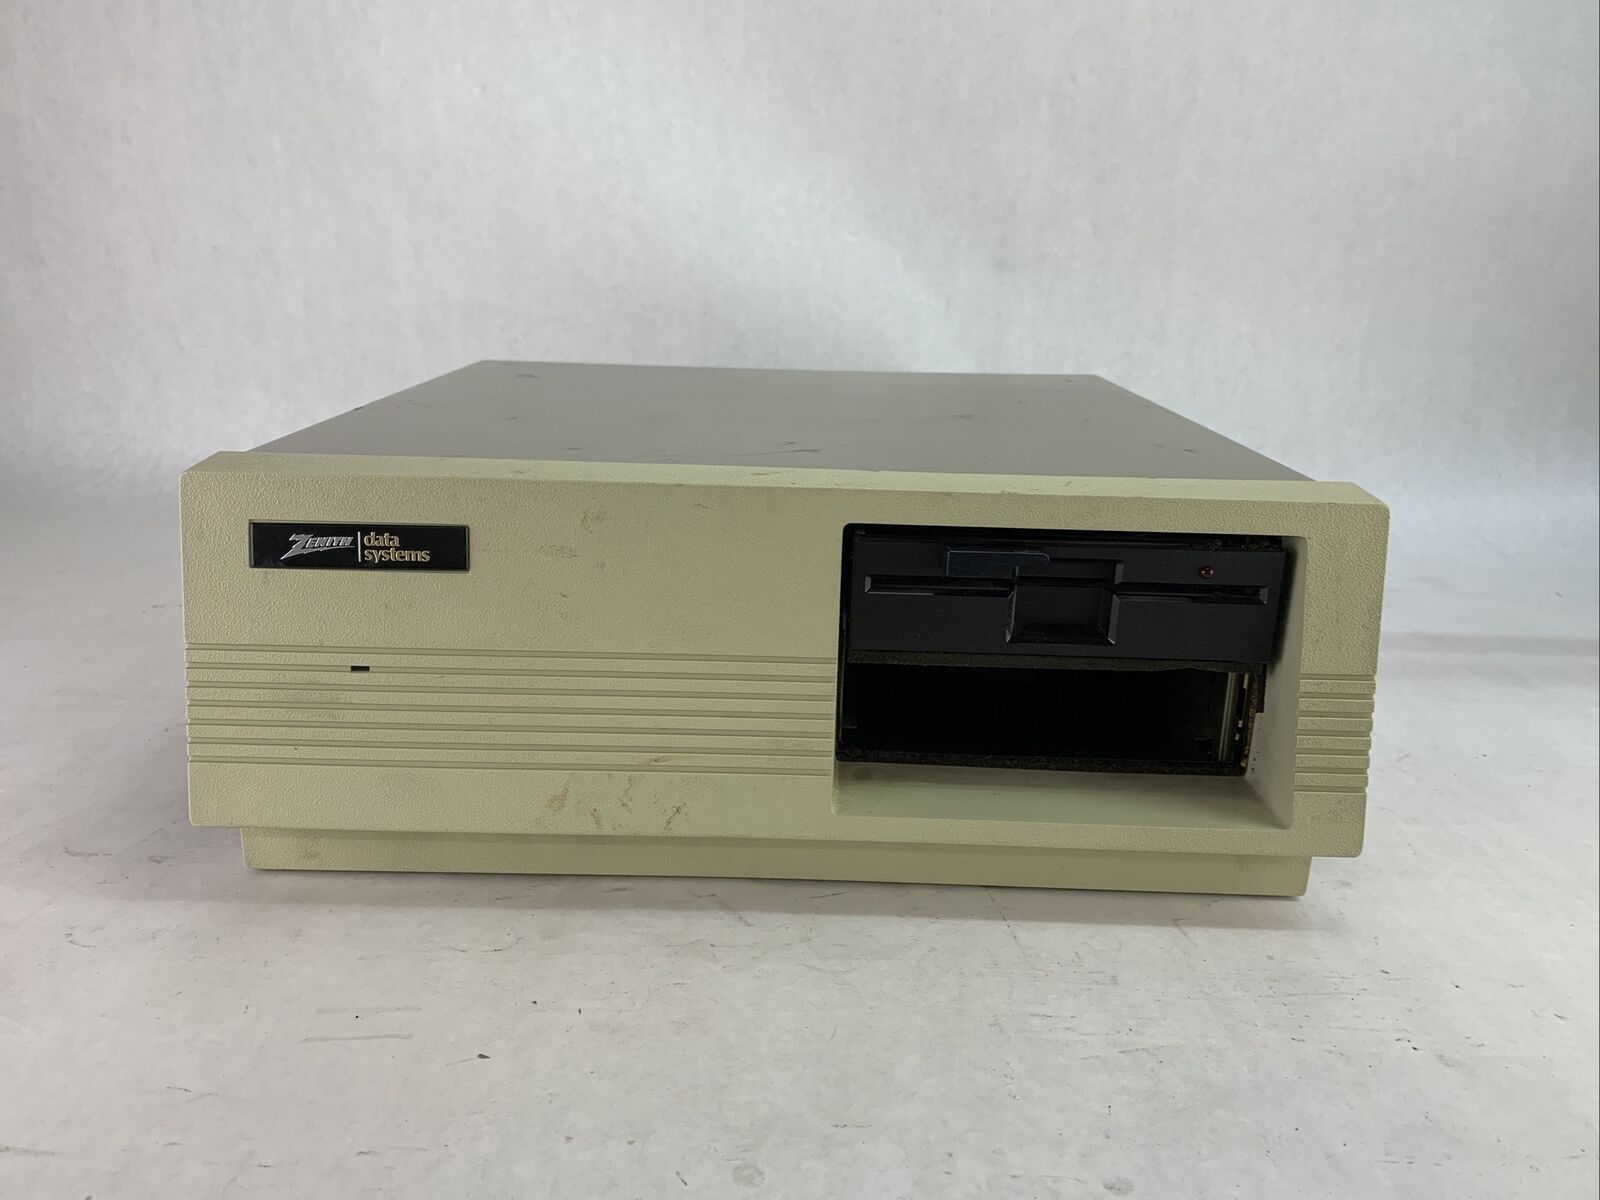 Zenith ZF-1217-DY P8088-2 815MHz 640MB RAM No HDD No OS